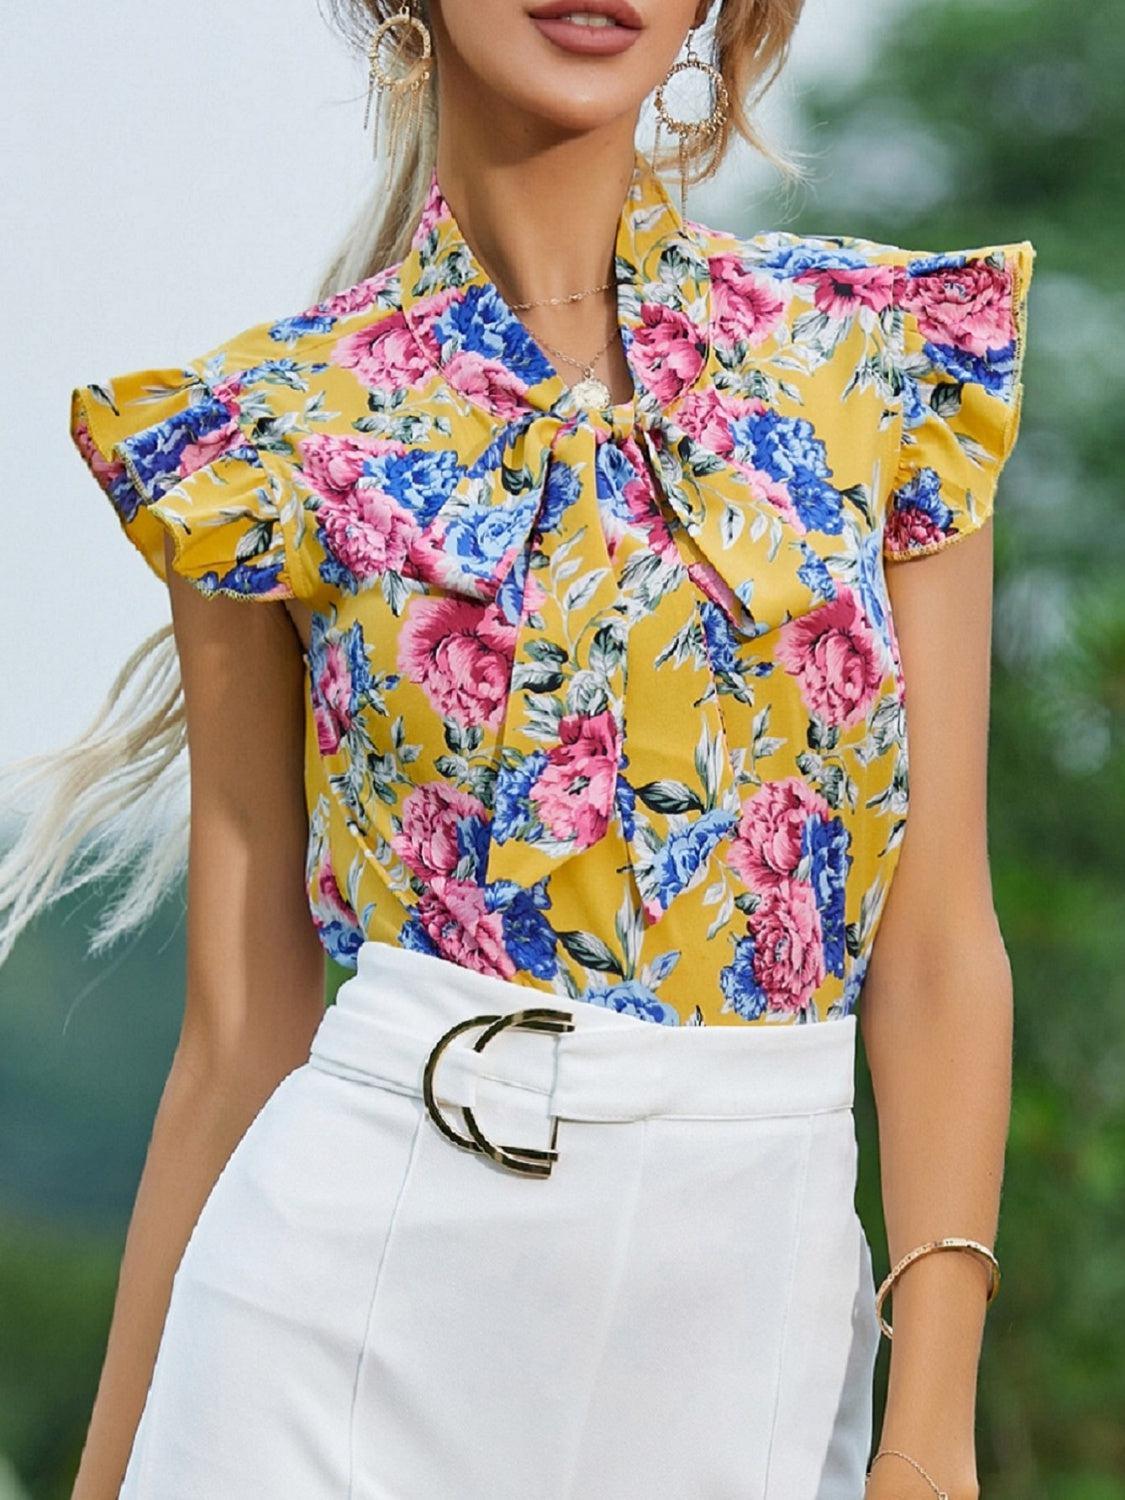 a woman wearing a yellow floral shirt and white skirt